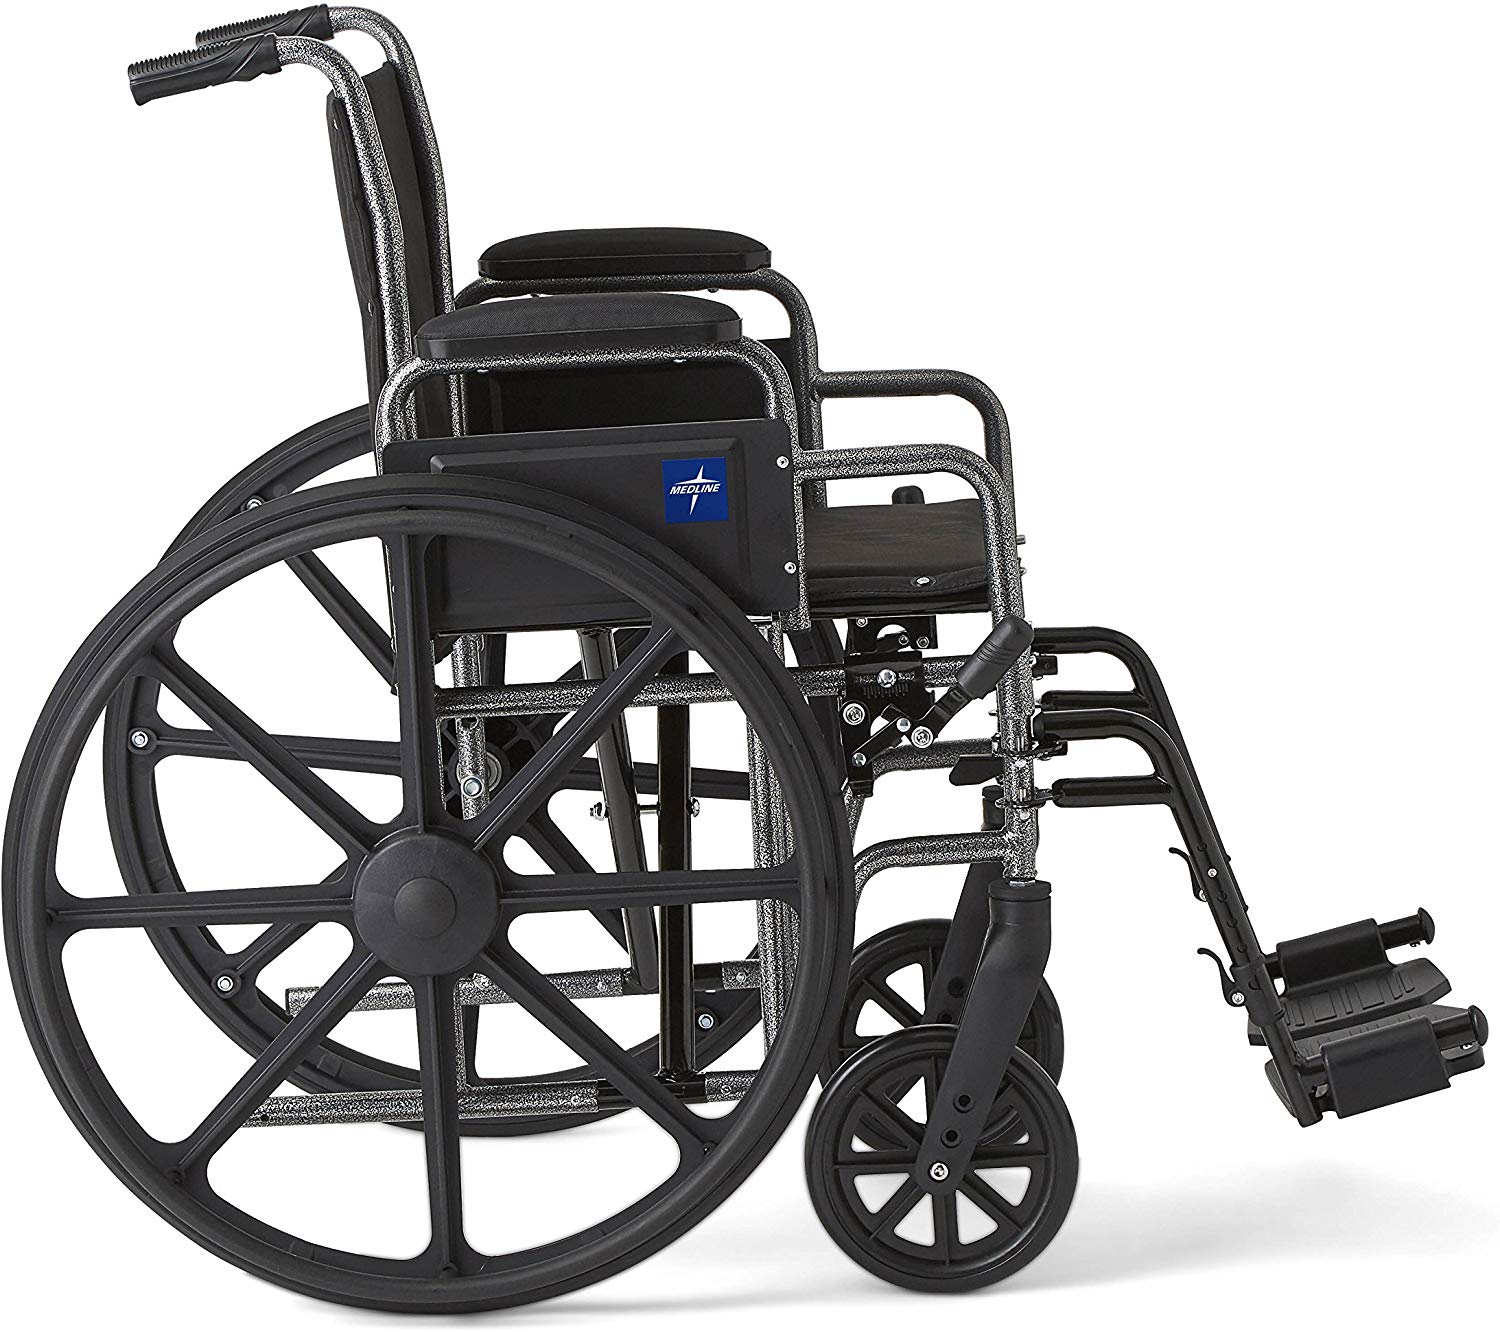 Medline Excel K1 Standard Wheelchair with Desk Length Armrests and Swing away Legrests, Basic Strong and Sturdy, 18" Seat Width - image 3 of 7